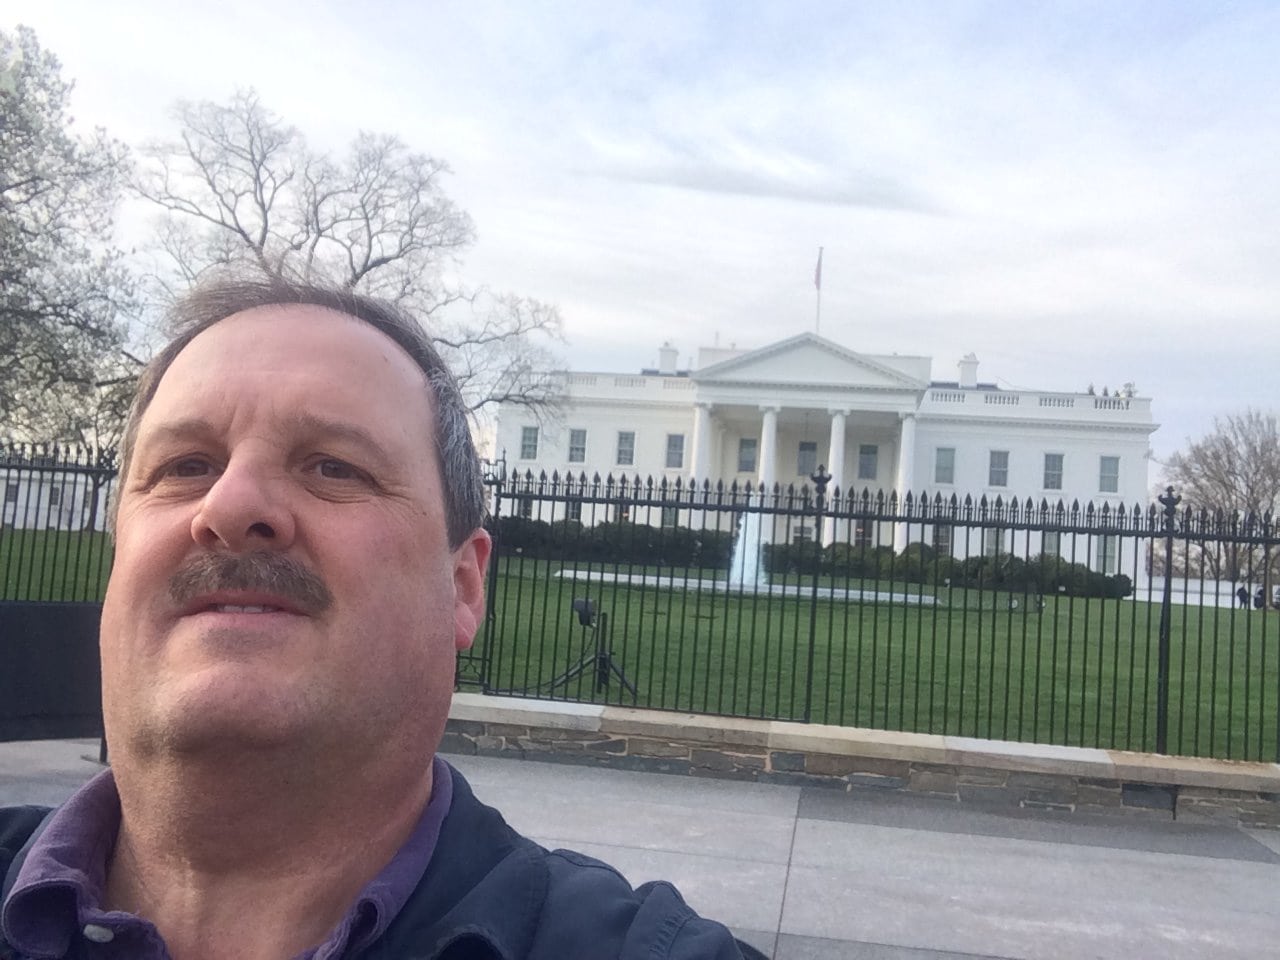 The White House and Me (my attempt at a selfie)